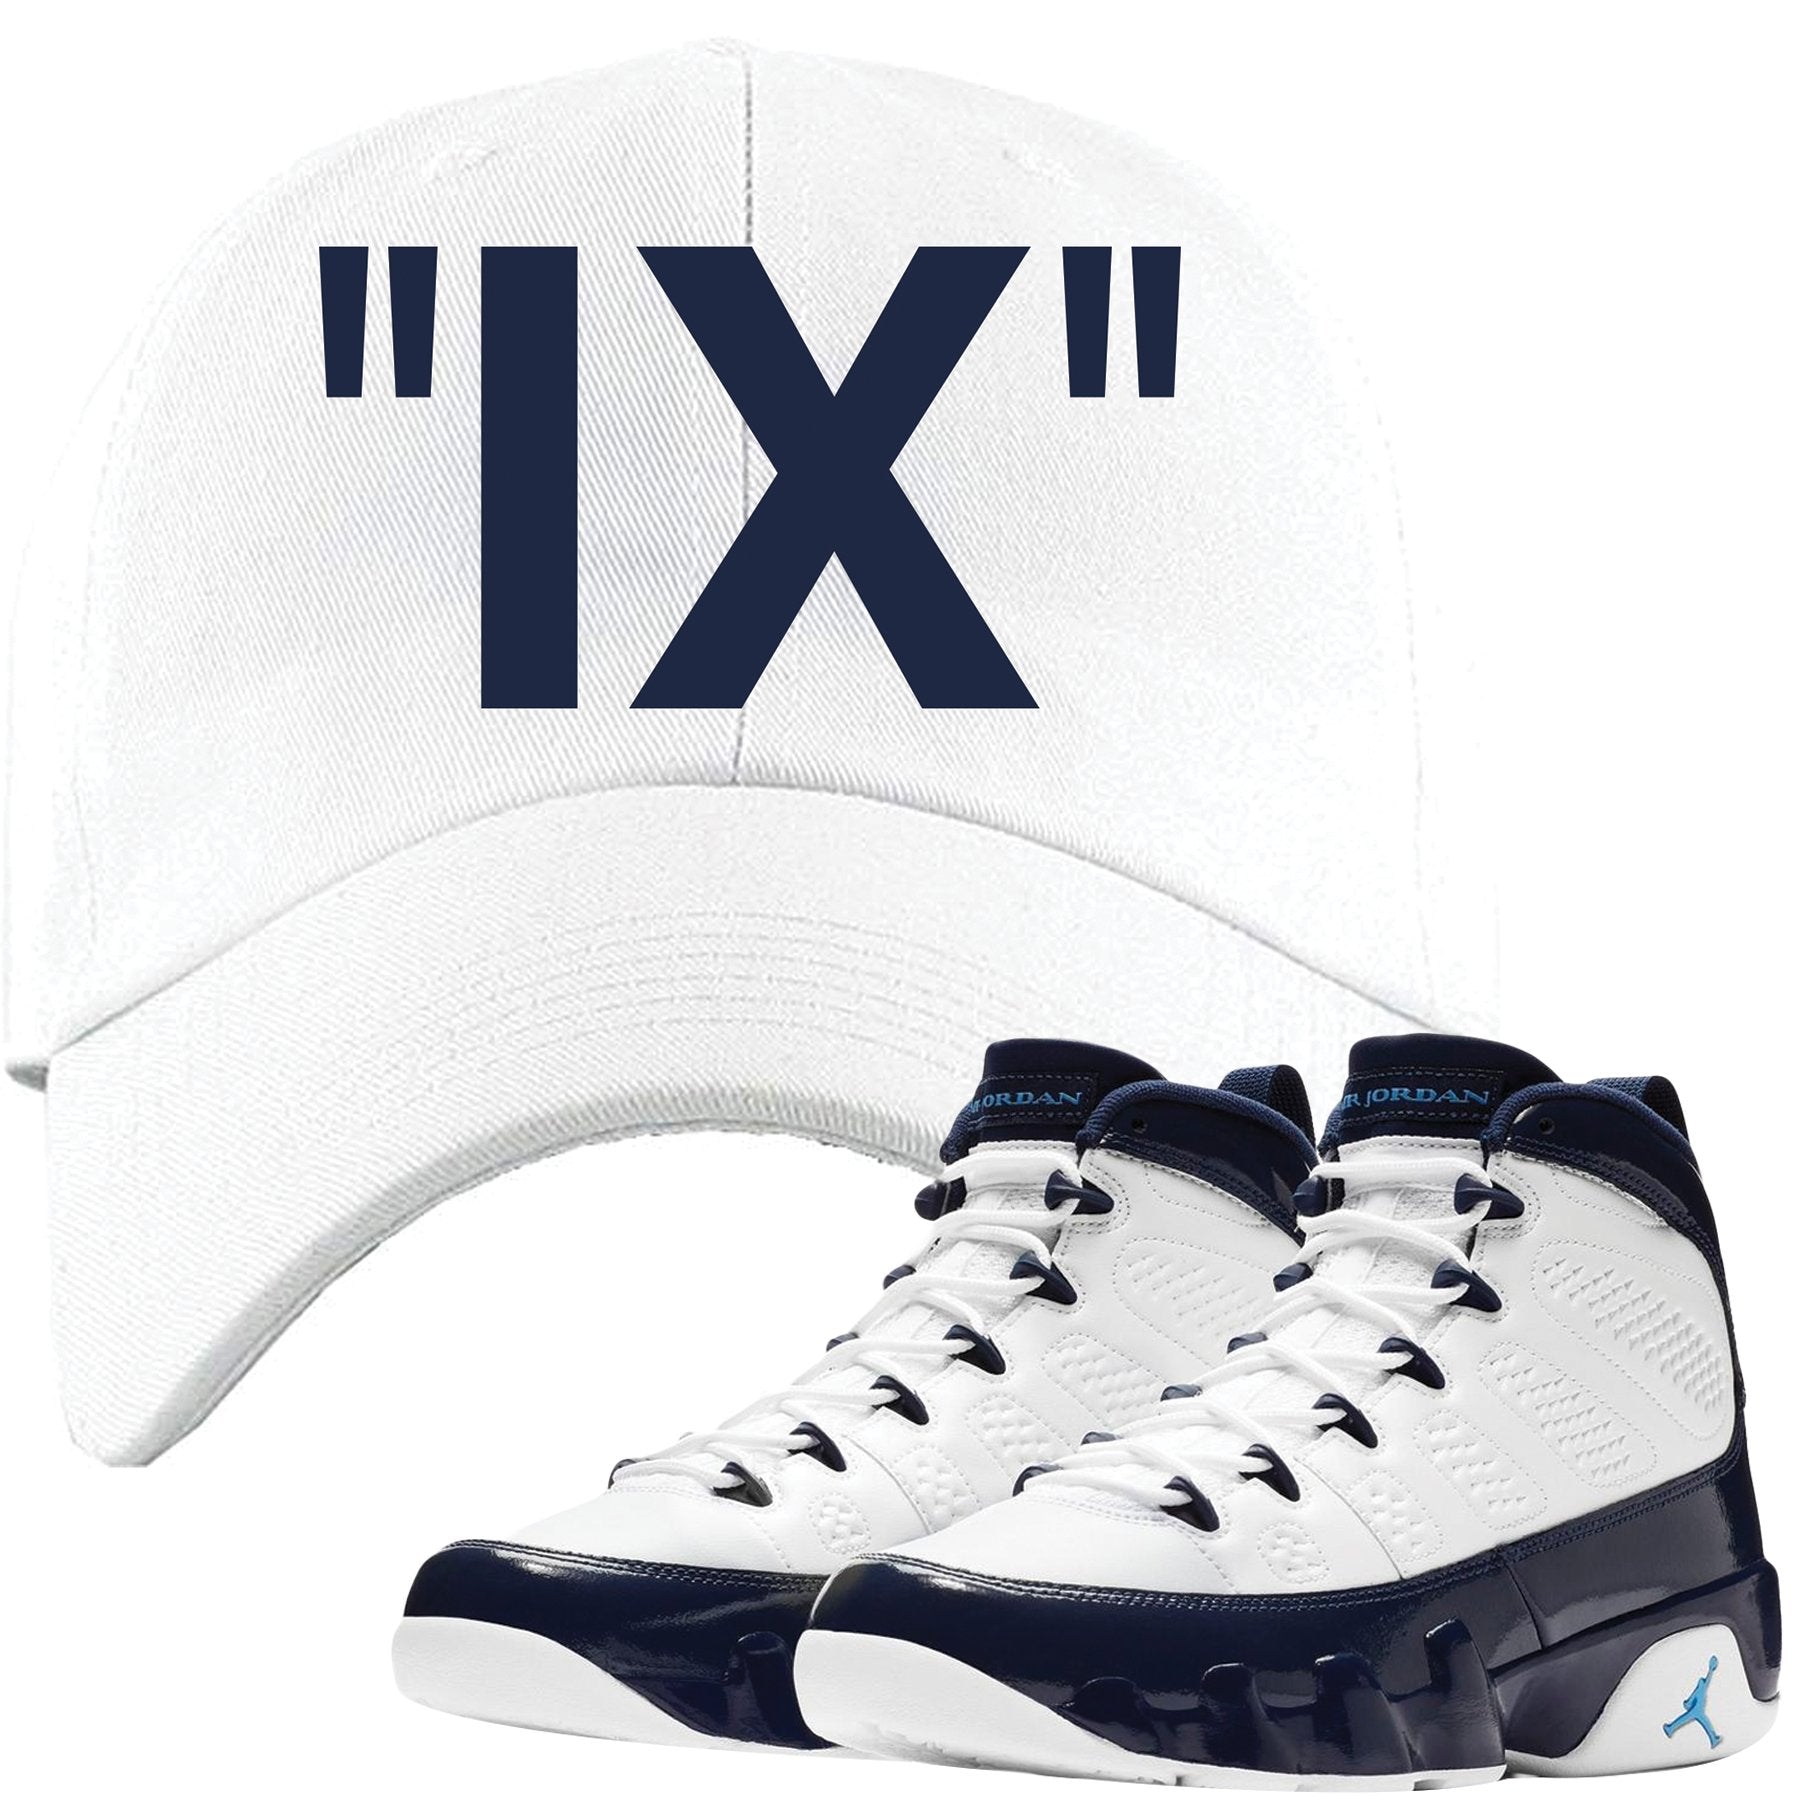 Match your pair of Jordan 9 UNC Blue Pearl All Star sneakers with this Jordan 9 UNC sneaker matching dad hat